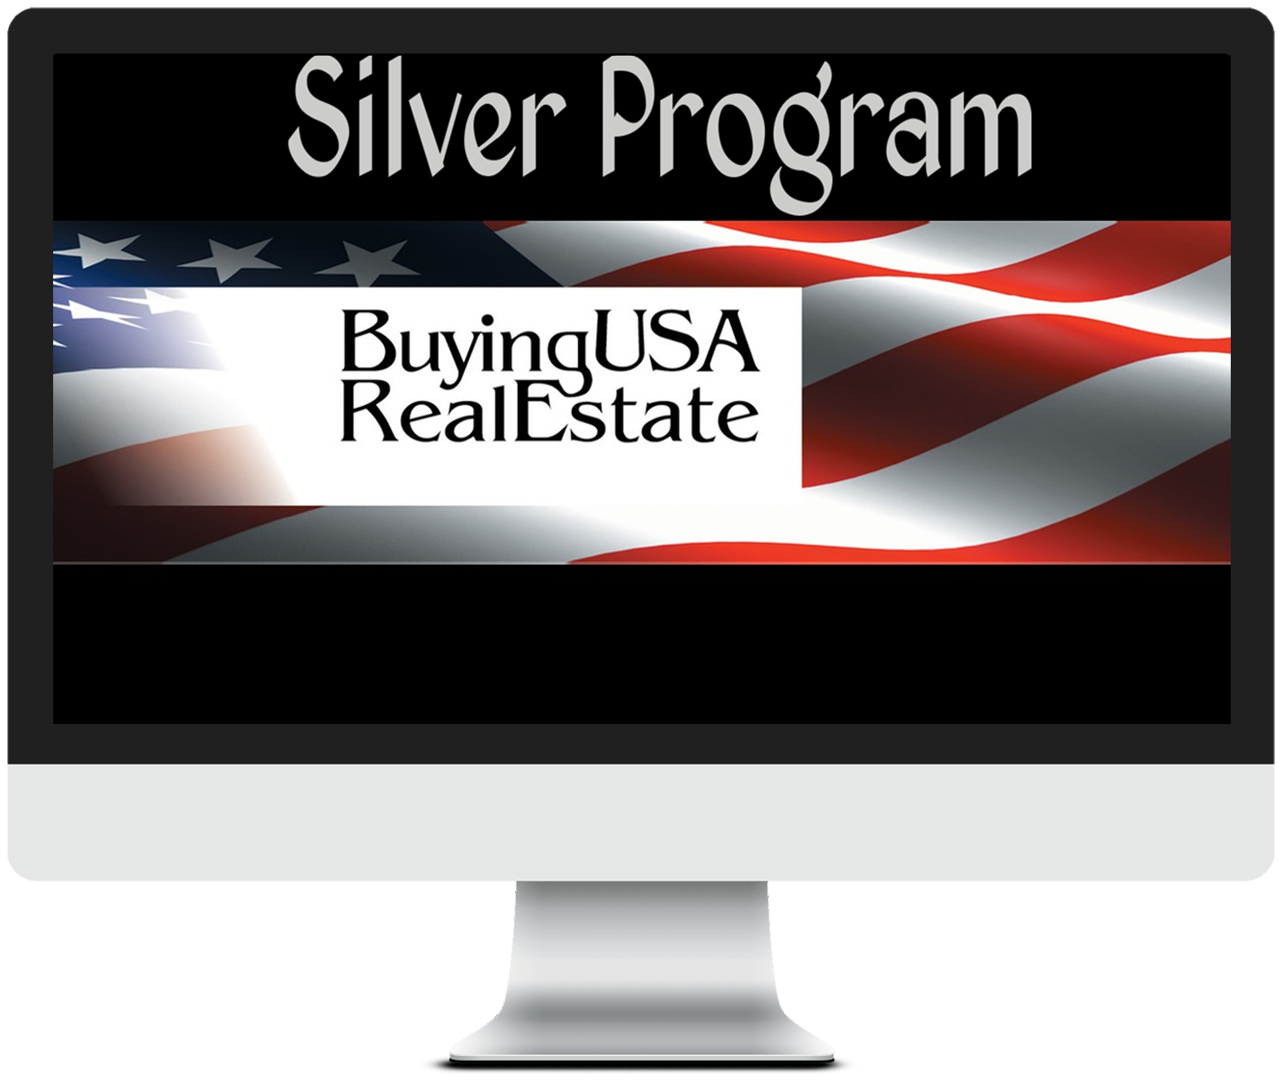 Silver Program for Buying USA Real Estate